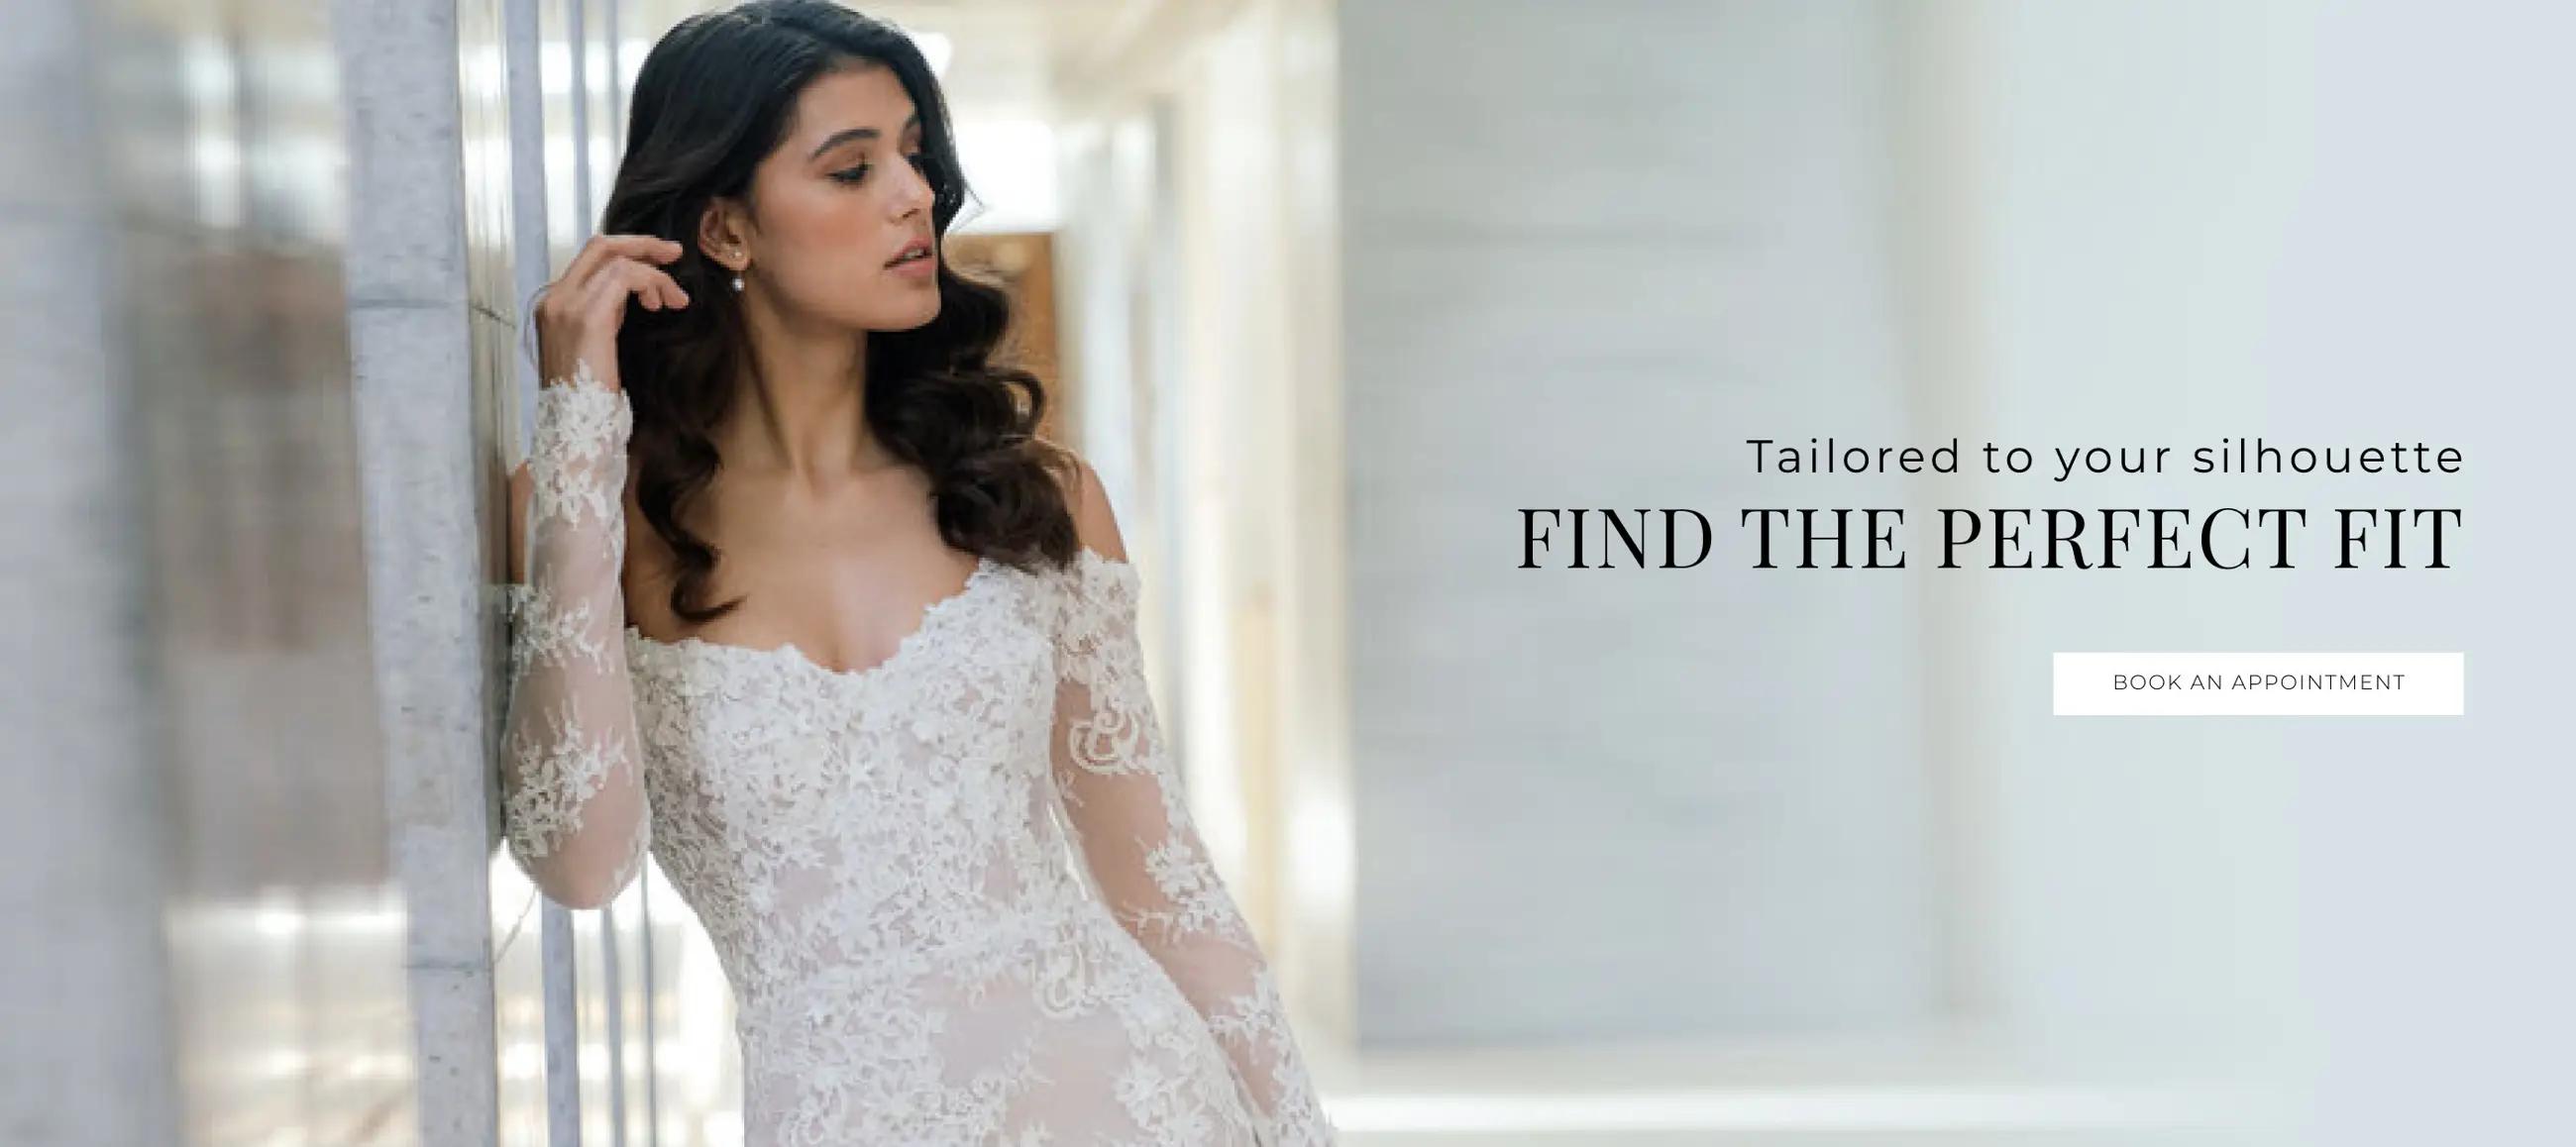 Wedding Dress Silhouettes: Your Guide To Finding Your Dream Dress